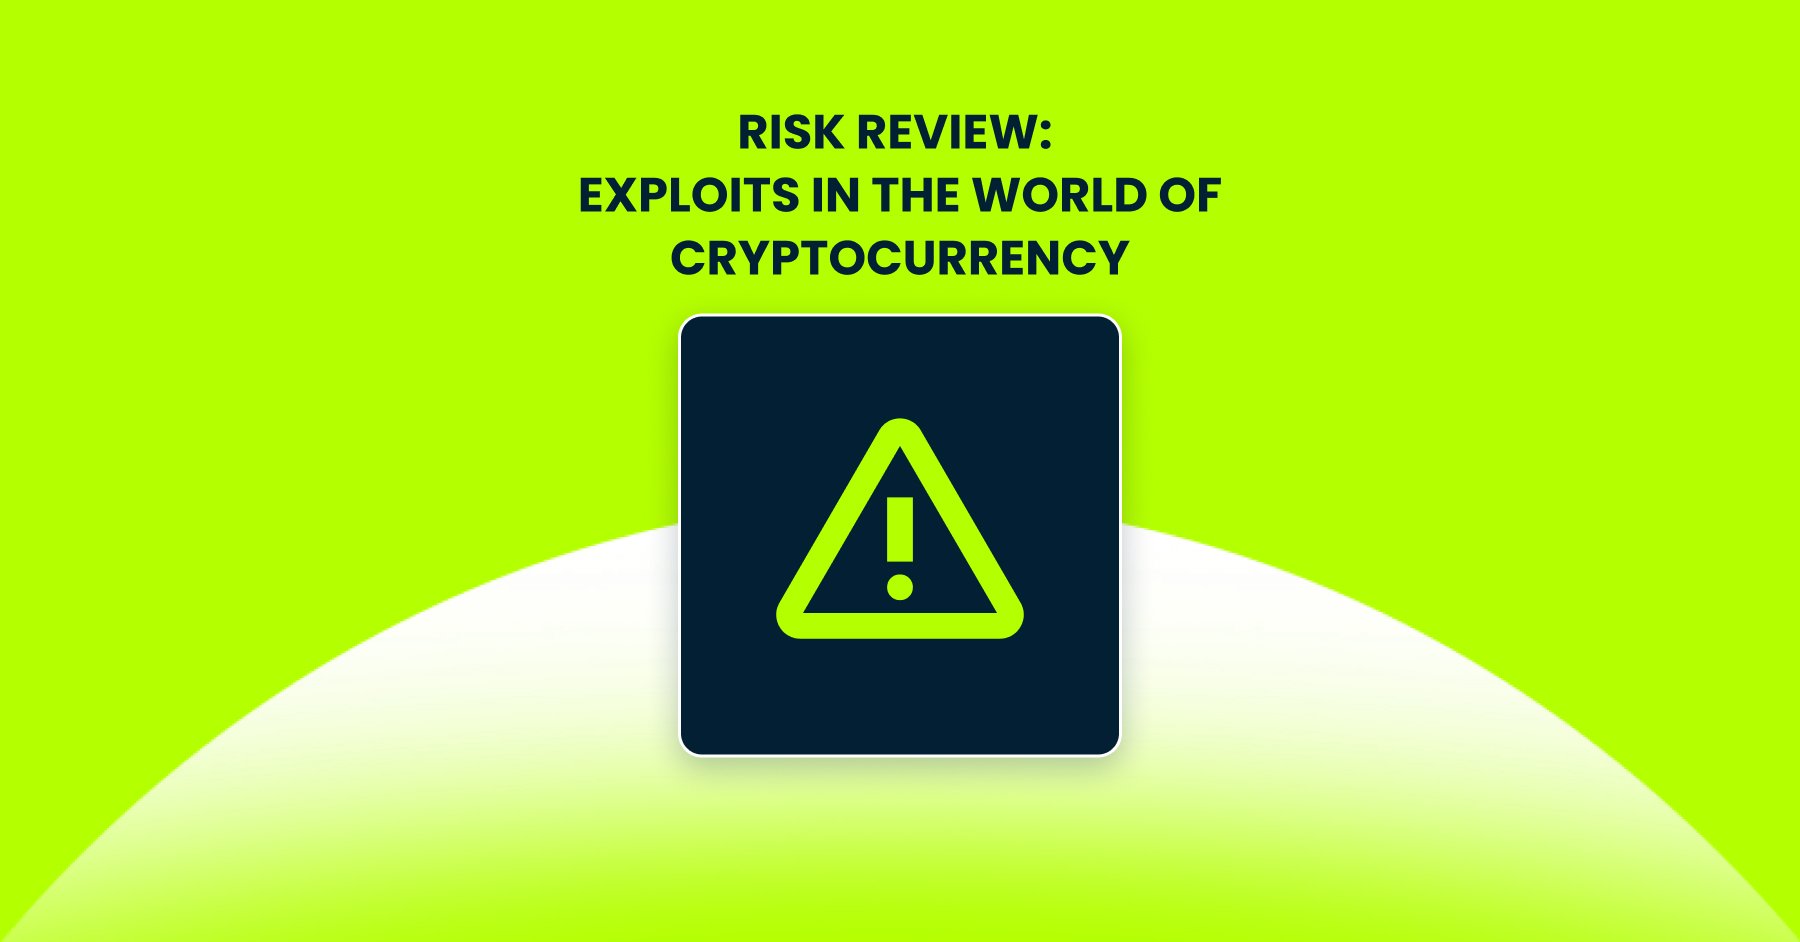 Risk review: Exploits in the world of cryptocurrency